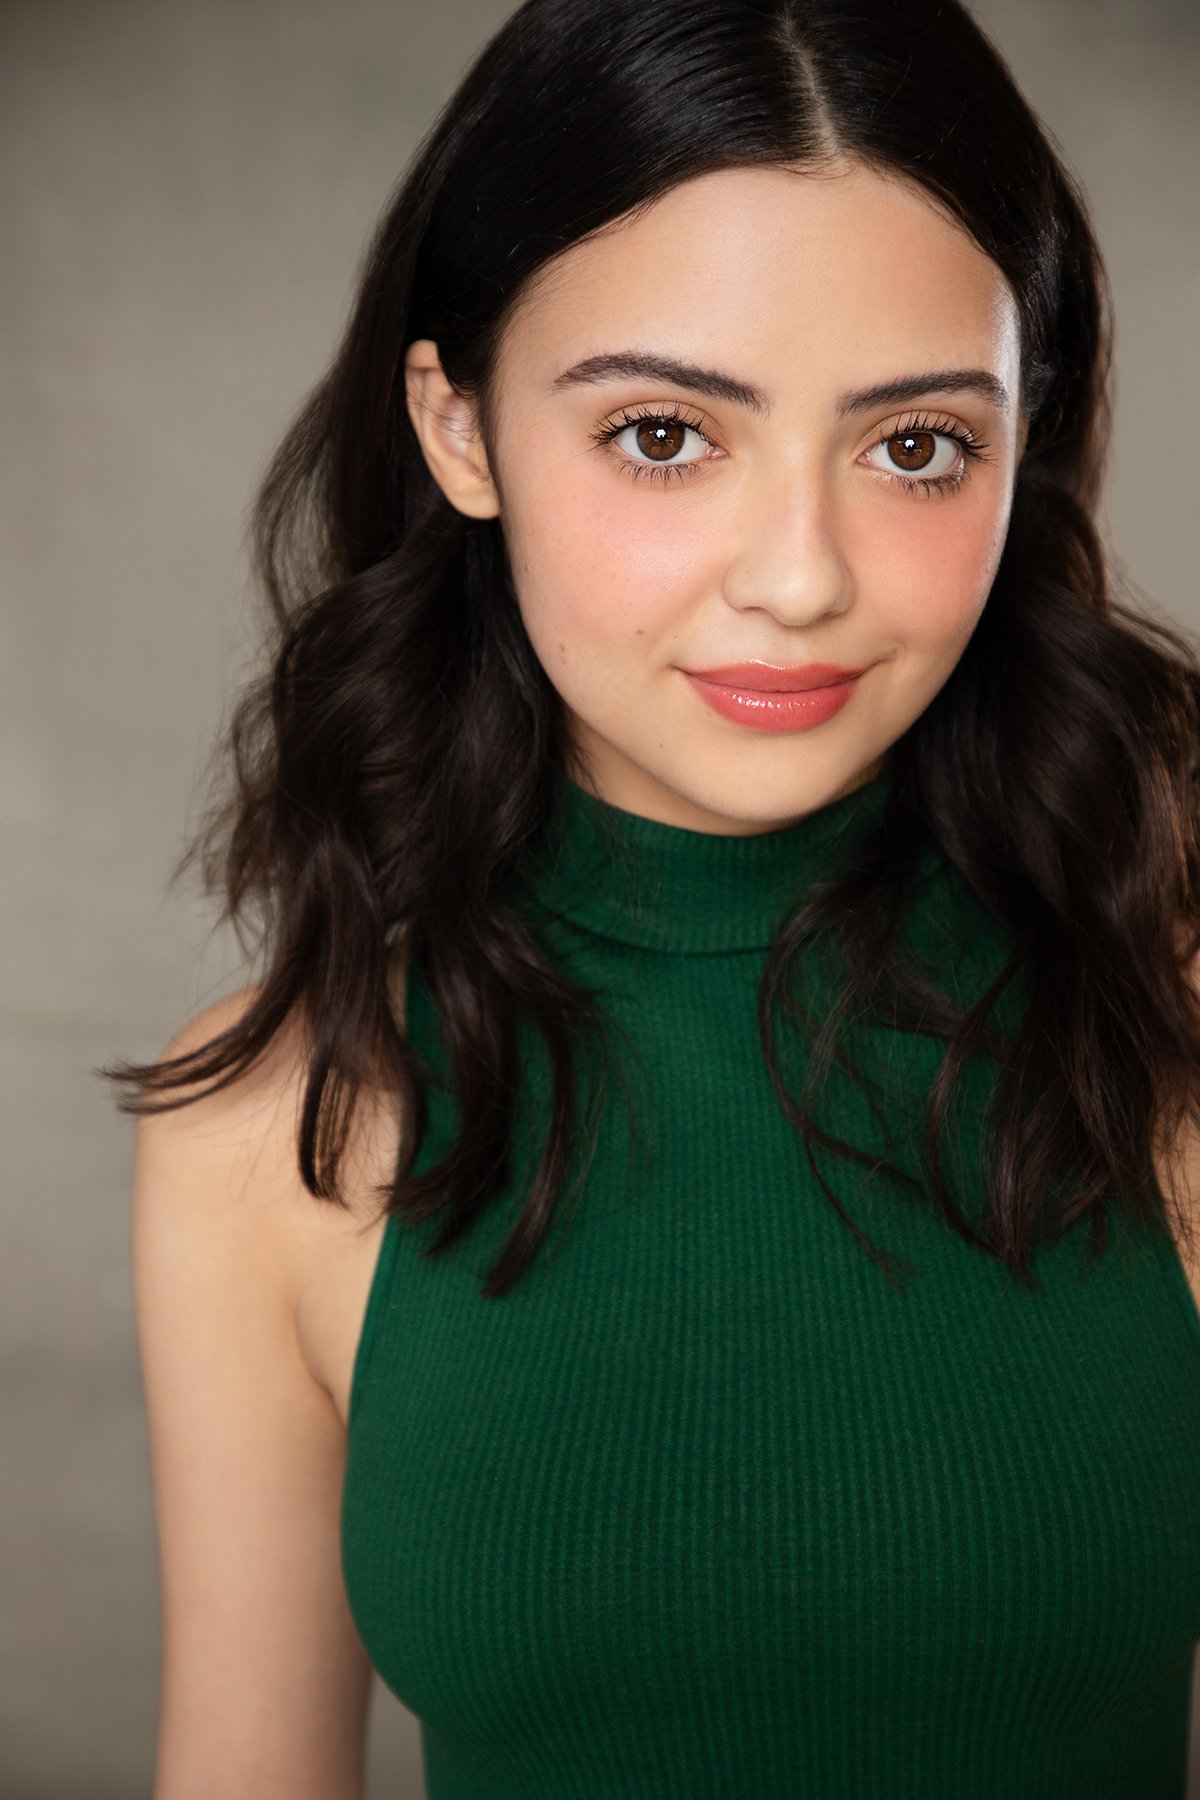 About — Isabella Esler - Actress and Singer